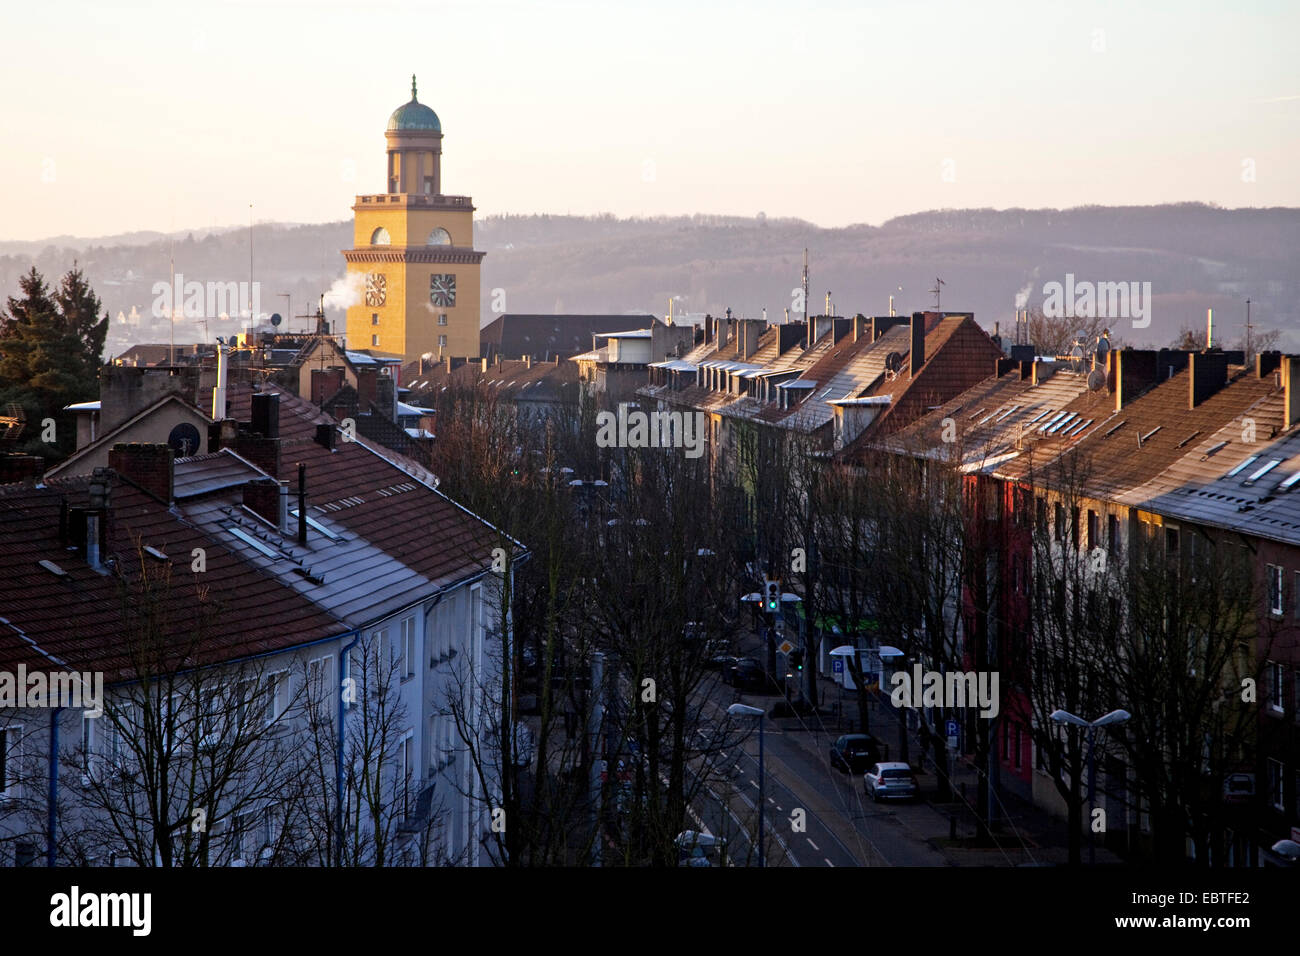 view to town and city hall tower, Germany, North Rhine-Westphalia, Ruhr Area, Witten Stock Photo